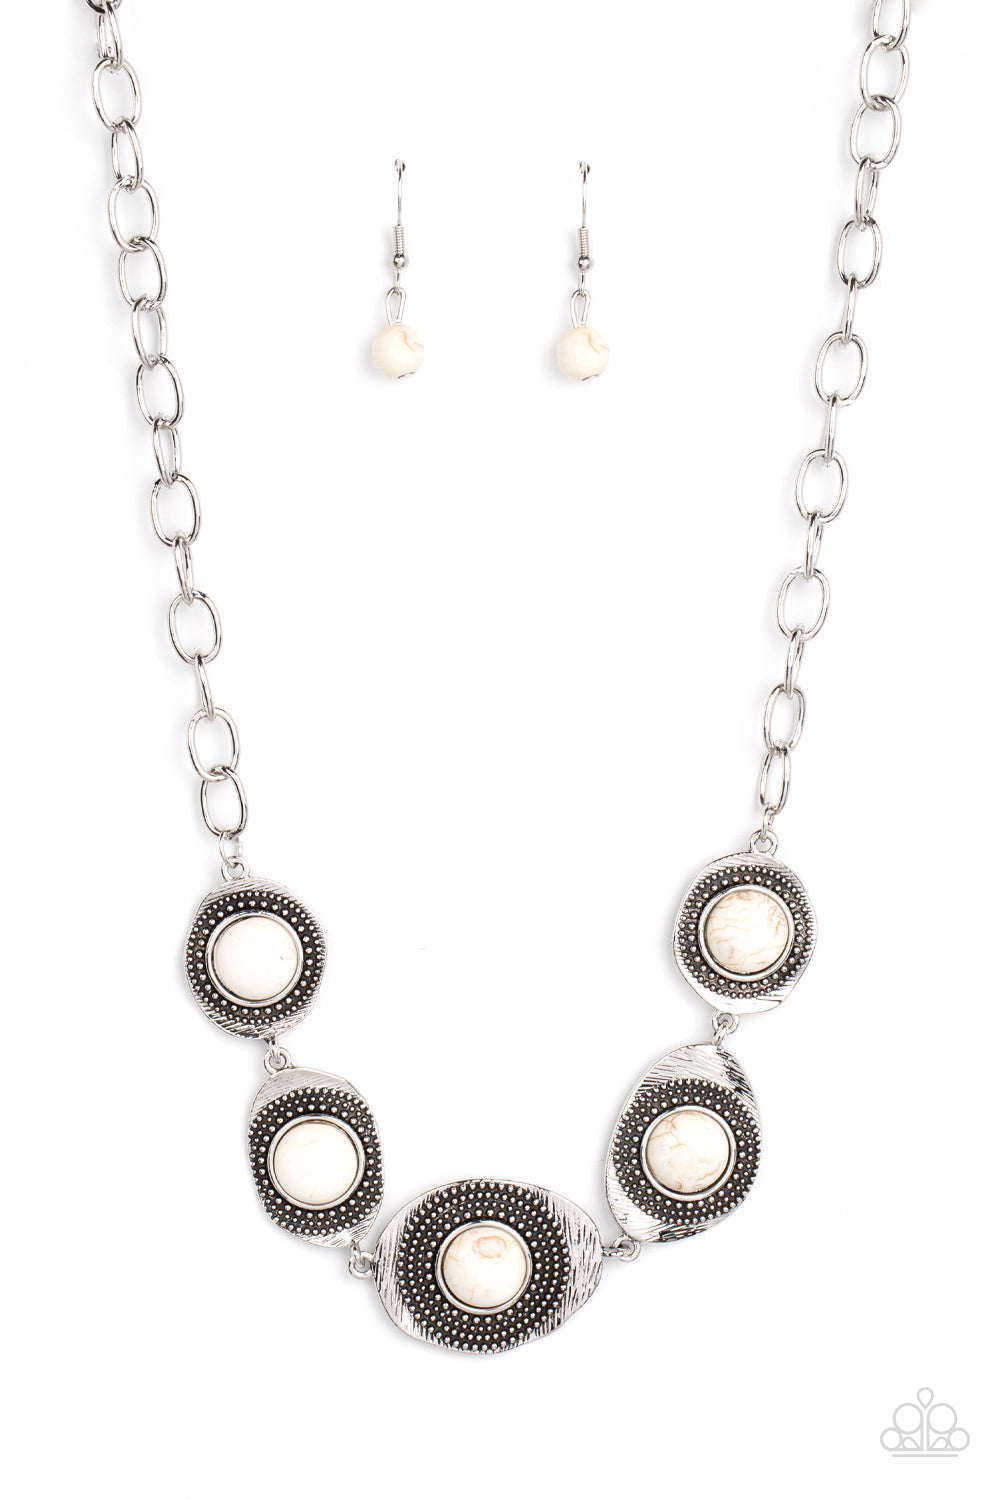 Homestead Harmony White Necklace - Paparazzi Accessories Item #P2SE-WTXX-282XX Refreshing white stones dot the centers of wavy irregular-shaped frames. Embellished with studded and etched feathery texture, the rustic frames create an earthy artisanal display below the collar. Features an adjustable clasp closure.  Sold as one individual necklace. Includes one pair of matching earrings.